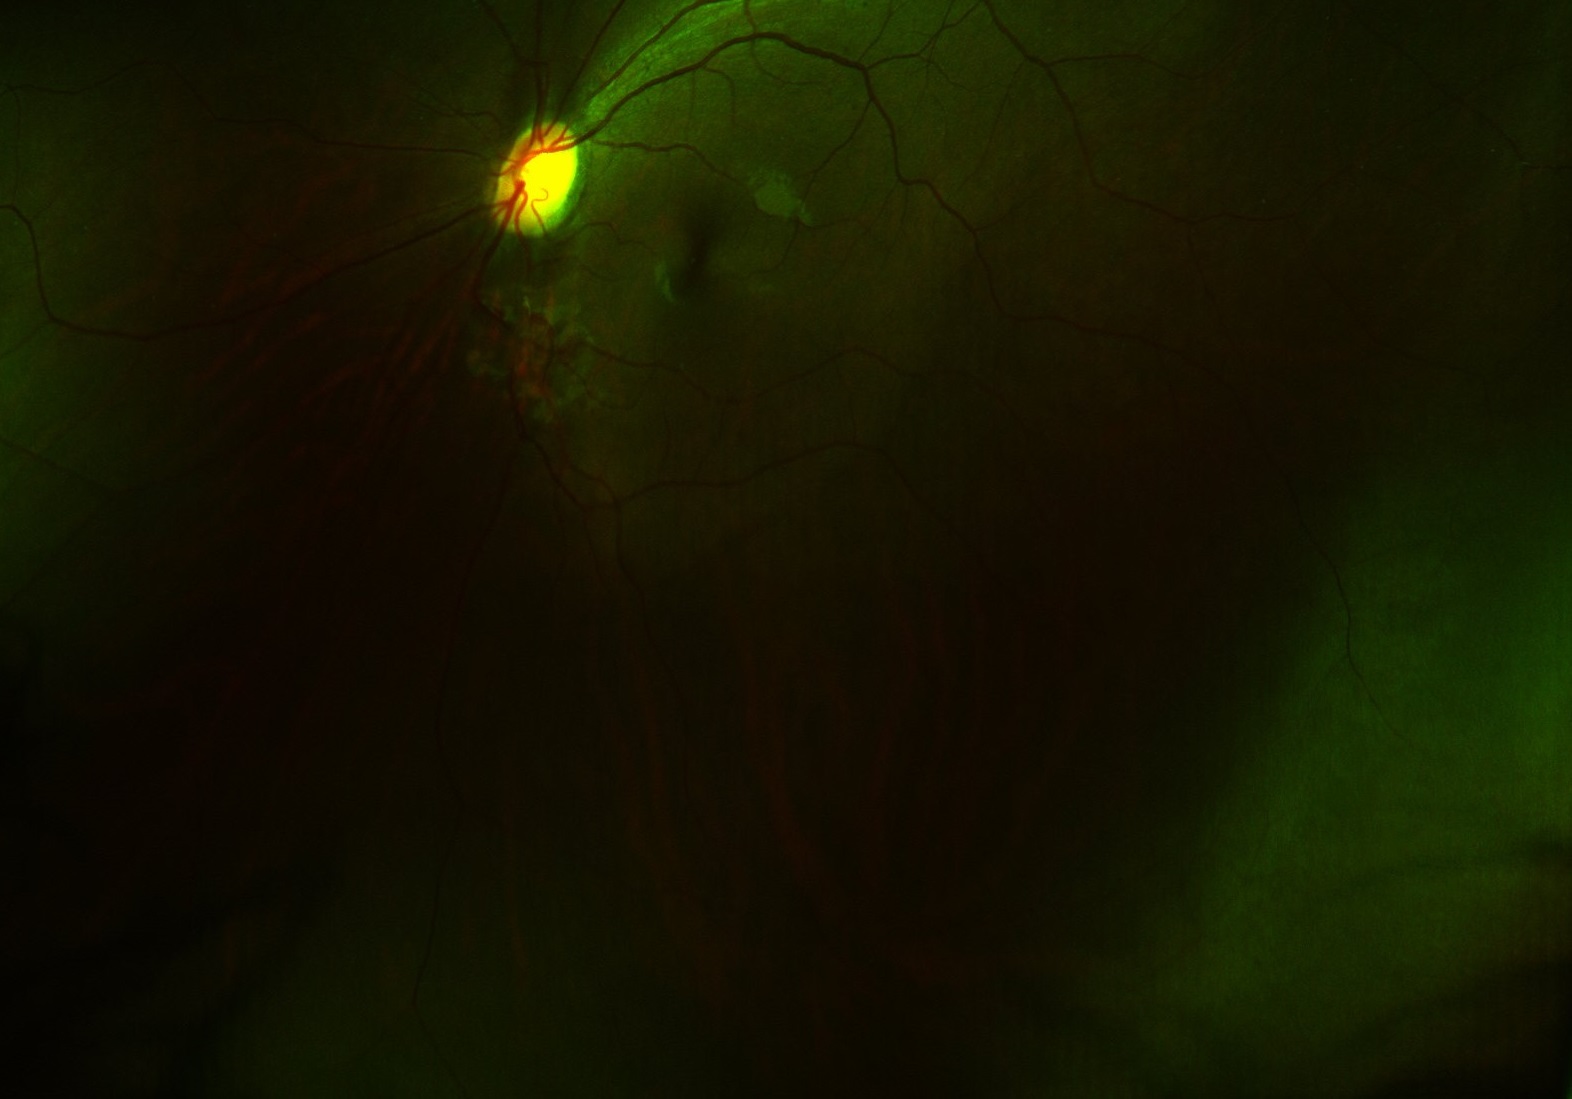 Digital retinal imaging scan, depicting blood vessels and nerves against a sea of green and black.